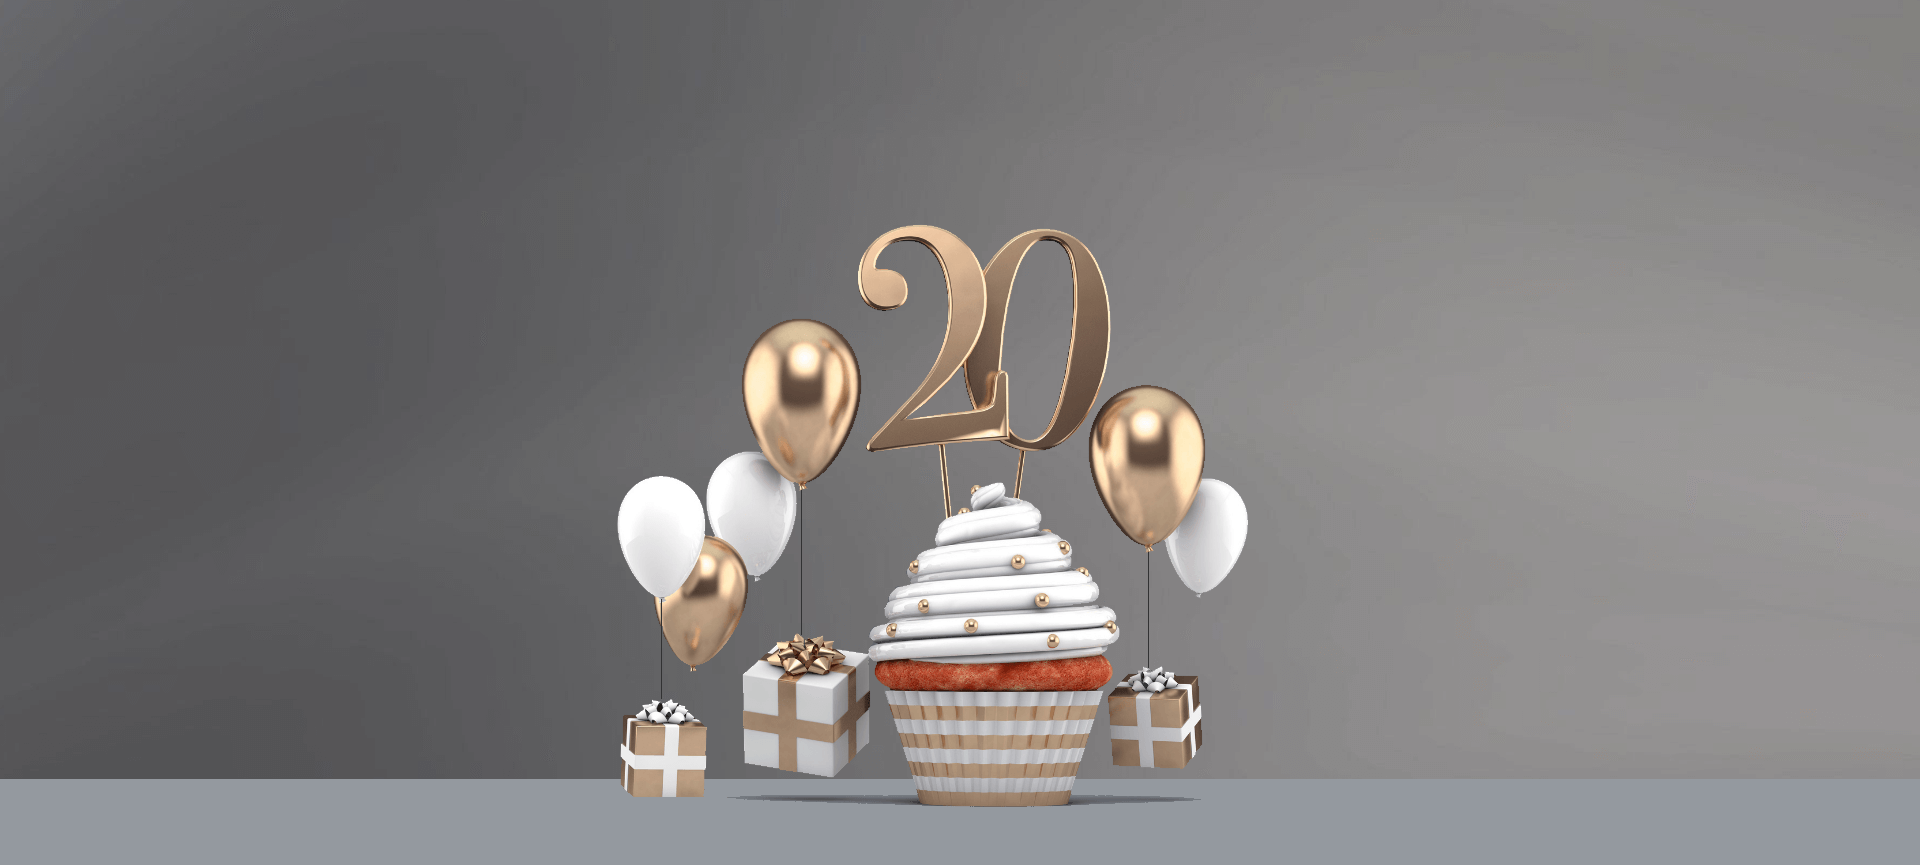 20th Anniversary cupcake with balloons and gifts